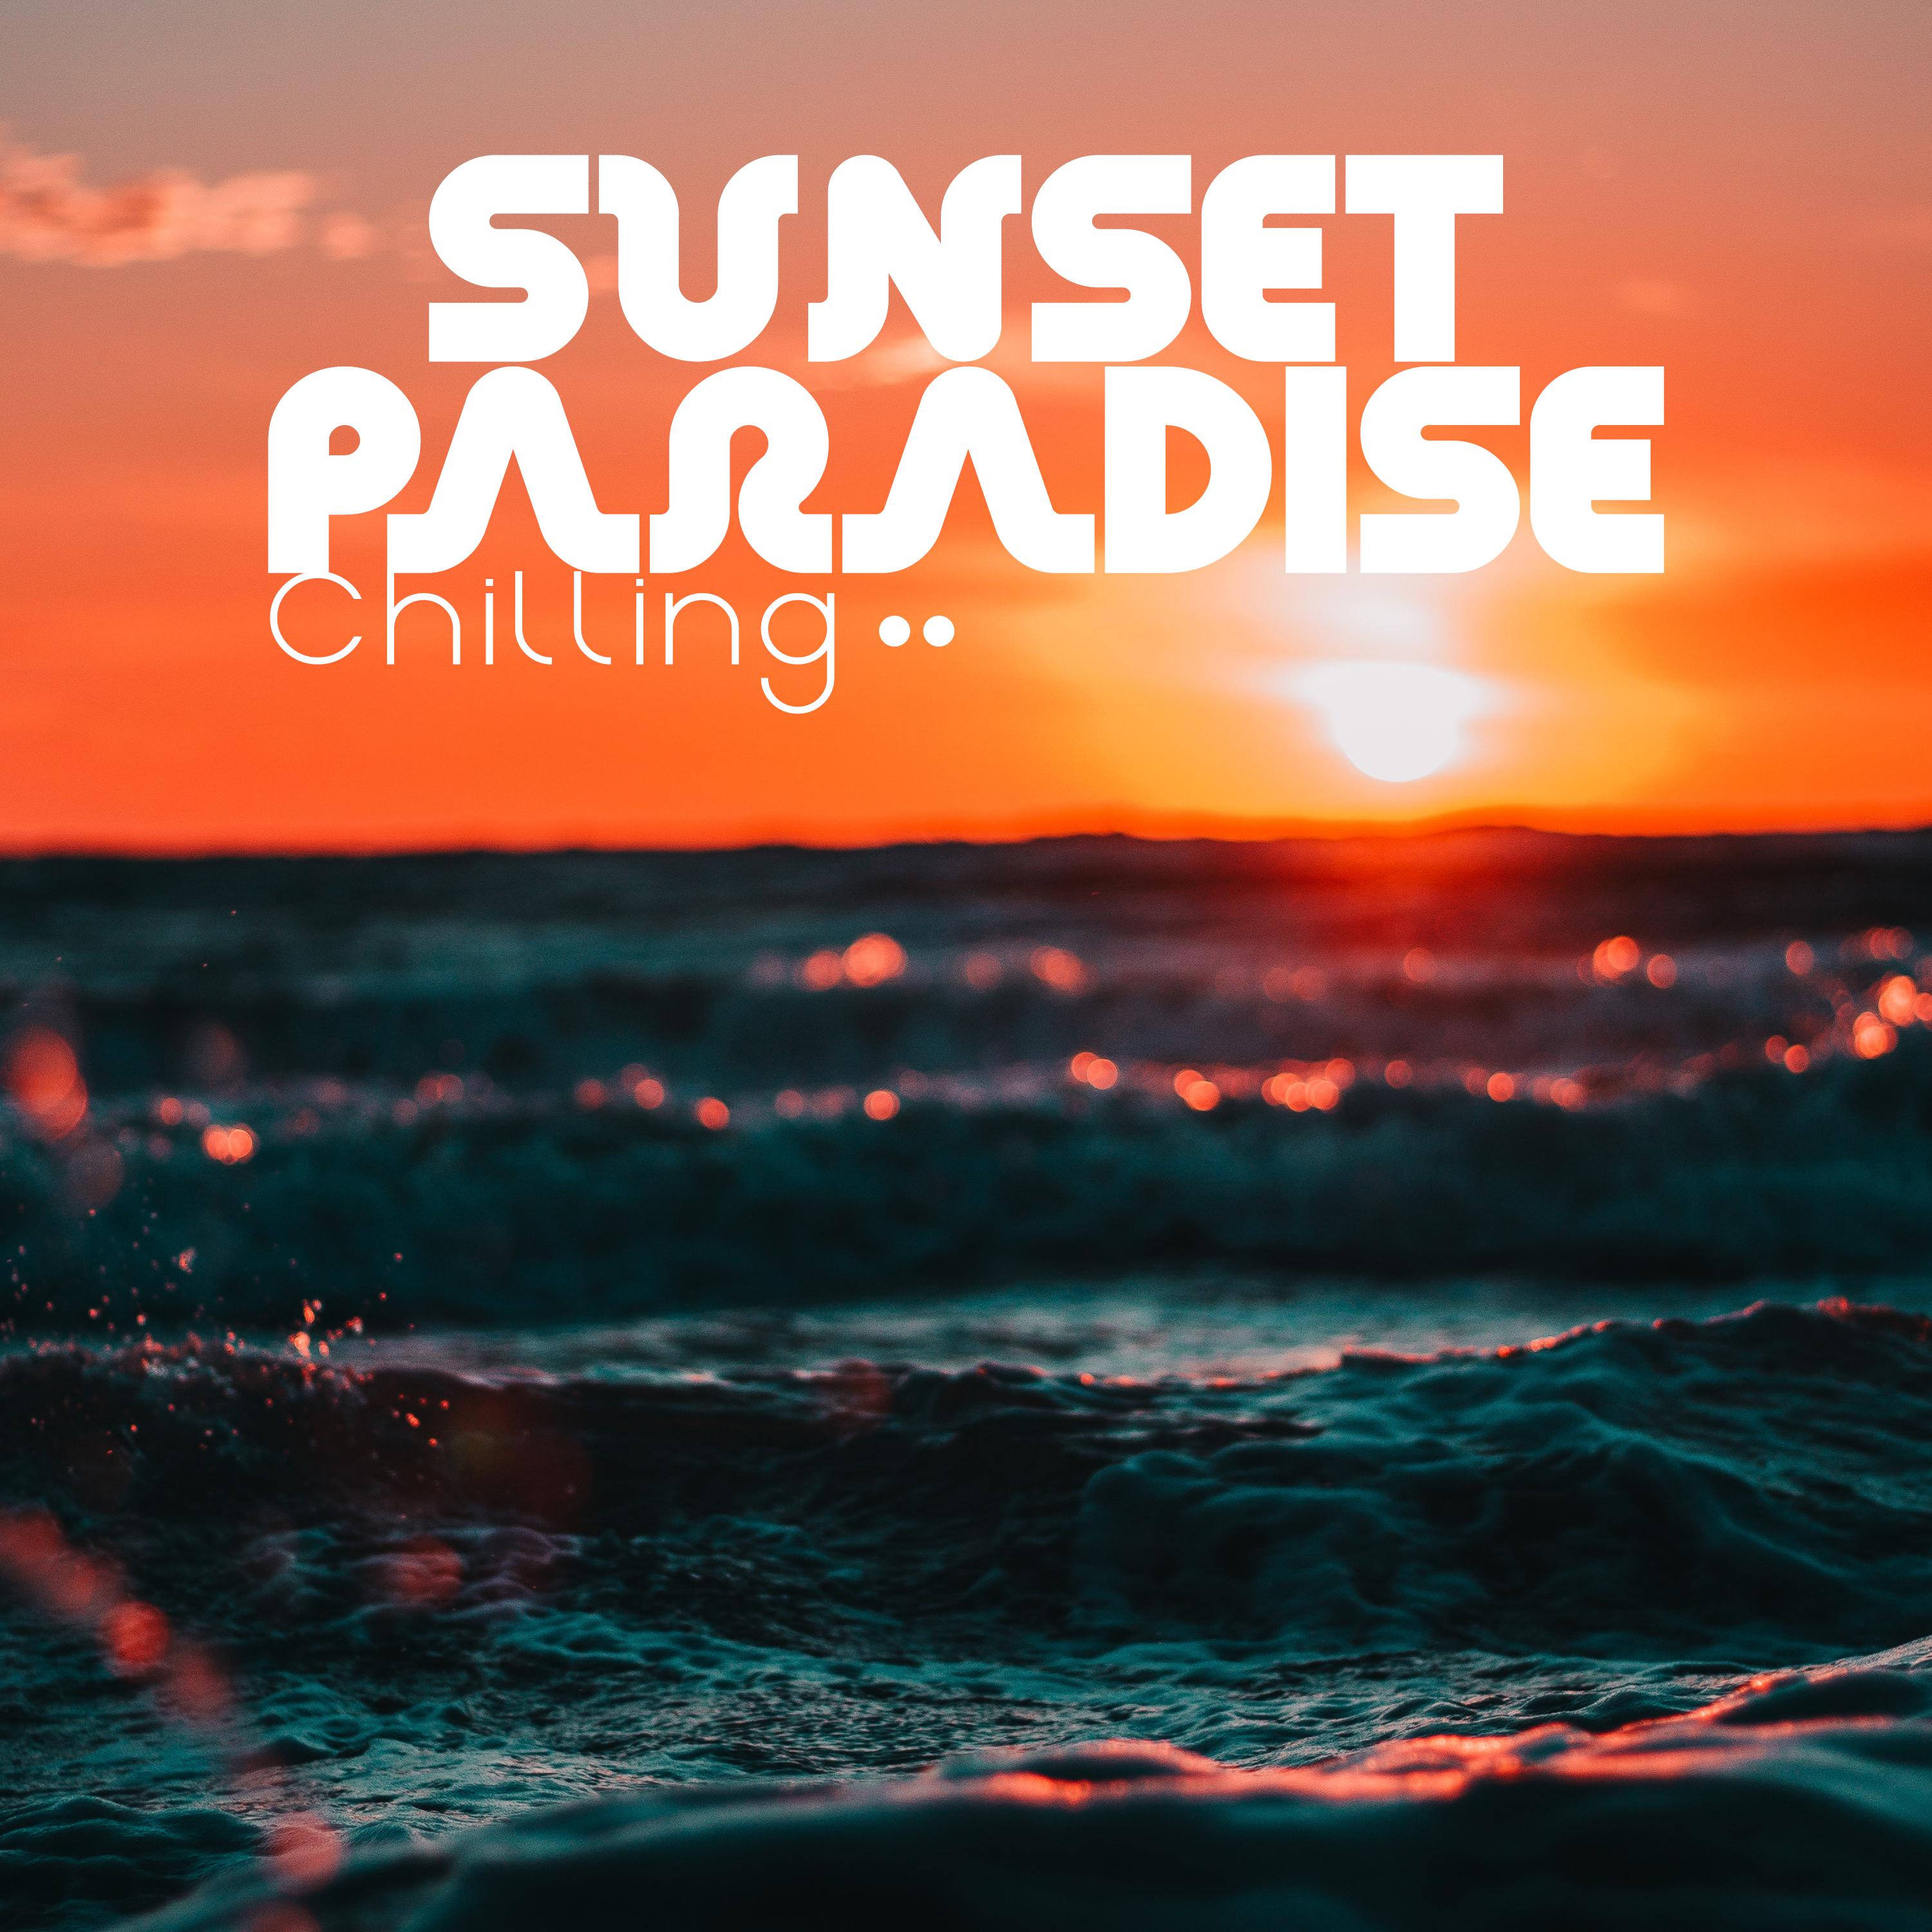 Sunset Paradise Chilling: 2019 Chill Out Music for Total Summer Relaxation, Holiday Lounge Beats & Ambients, Tropical Beach Good Vibes